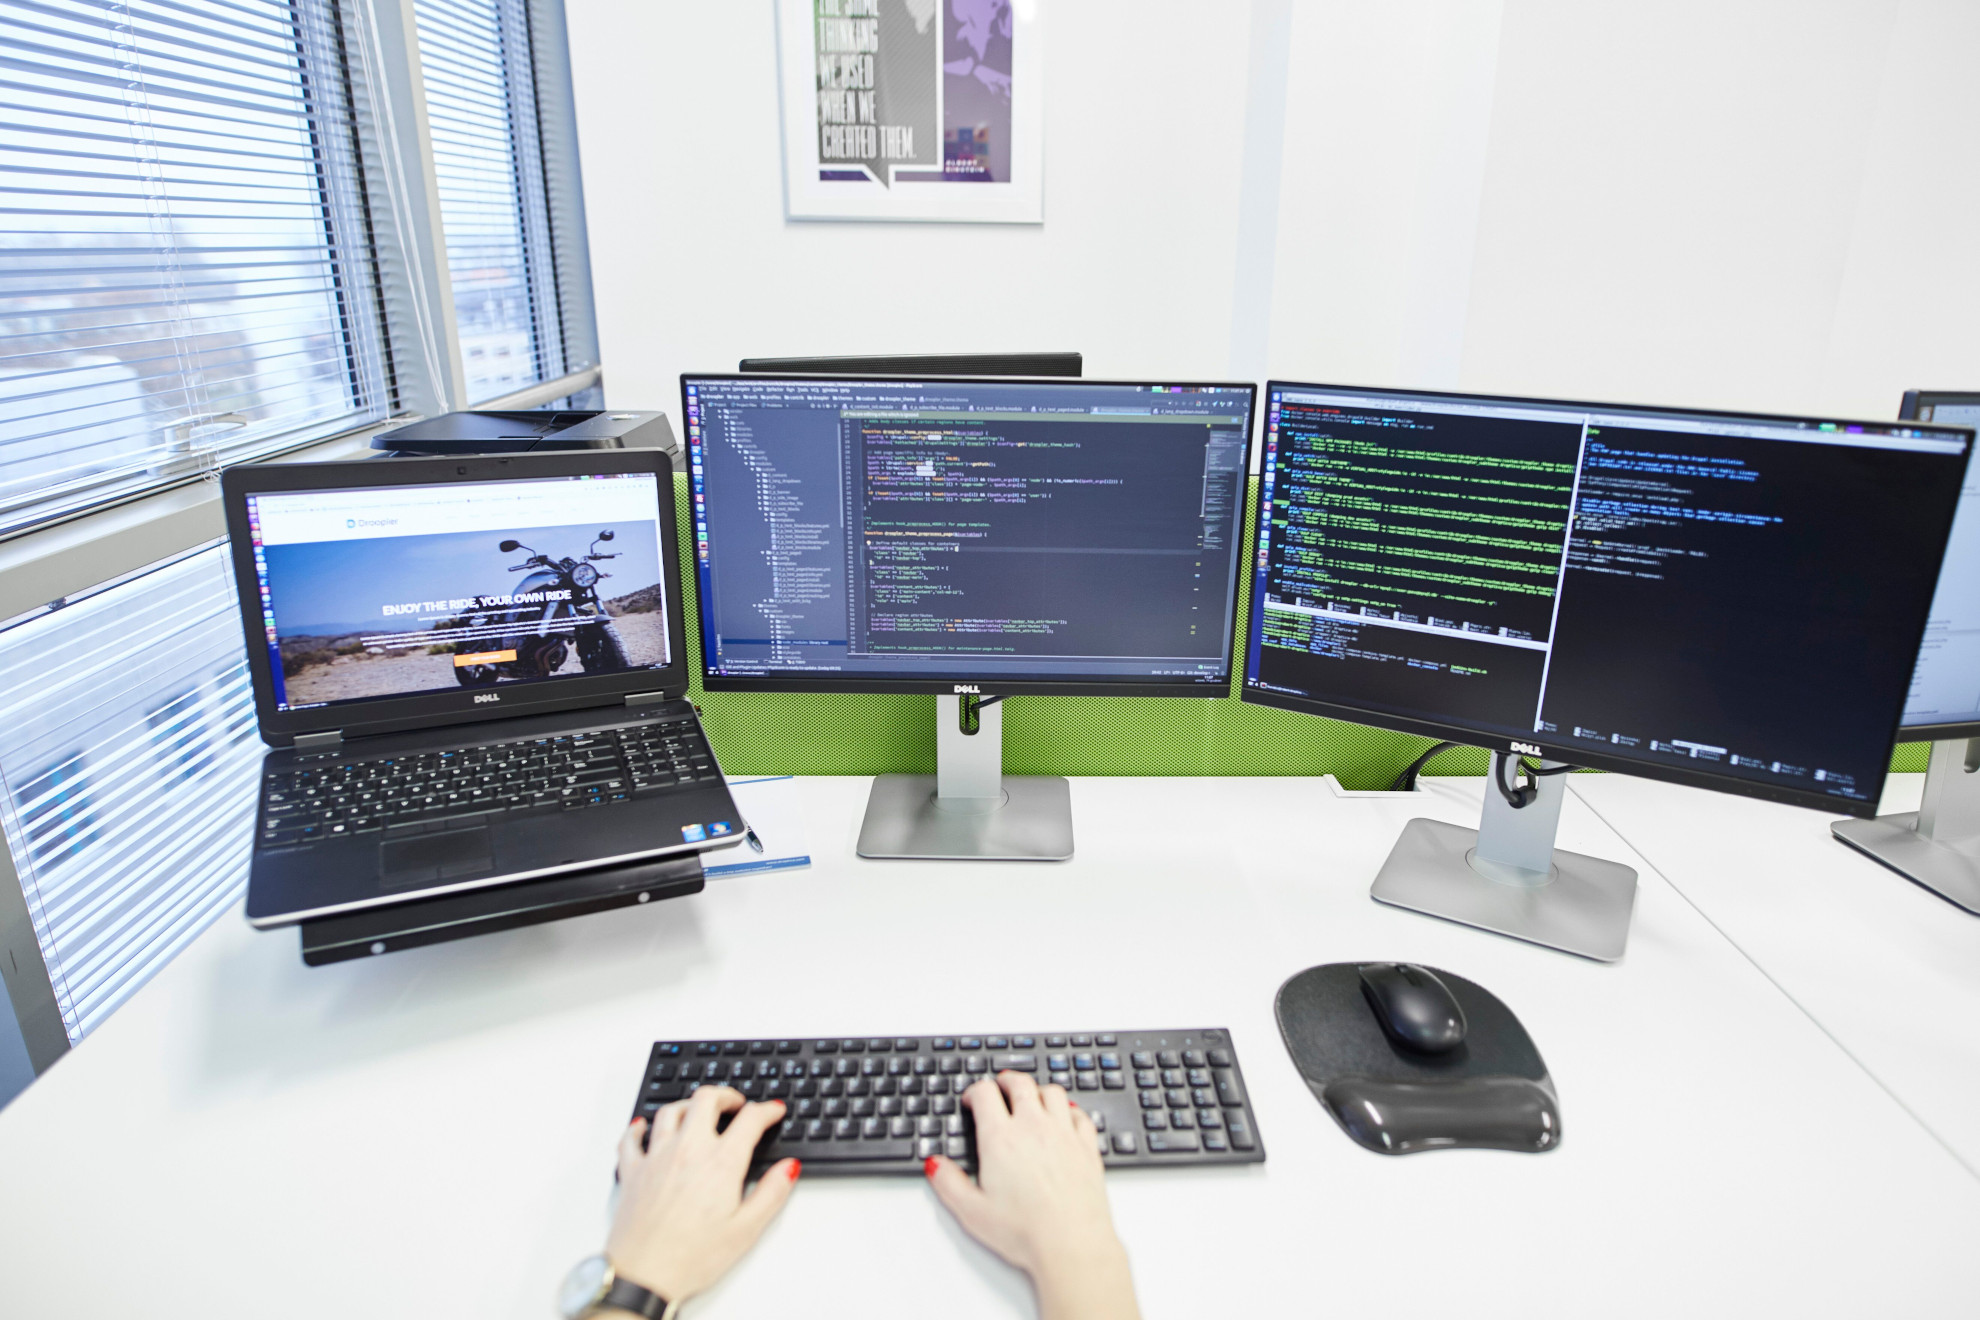 A picture of a developer's workspace, including all the equipment